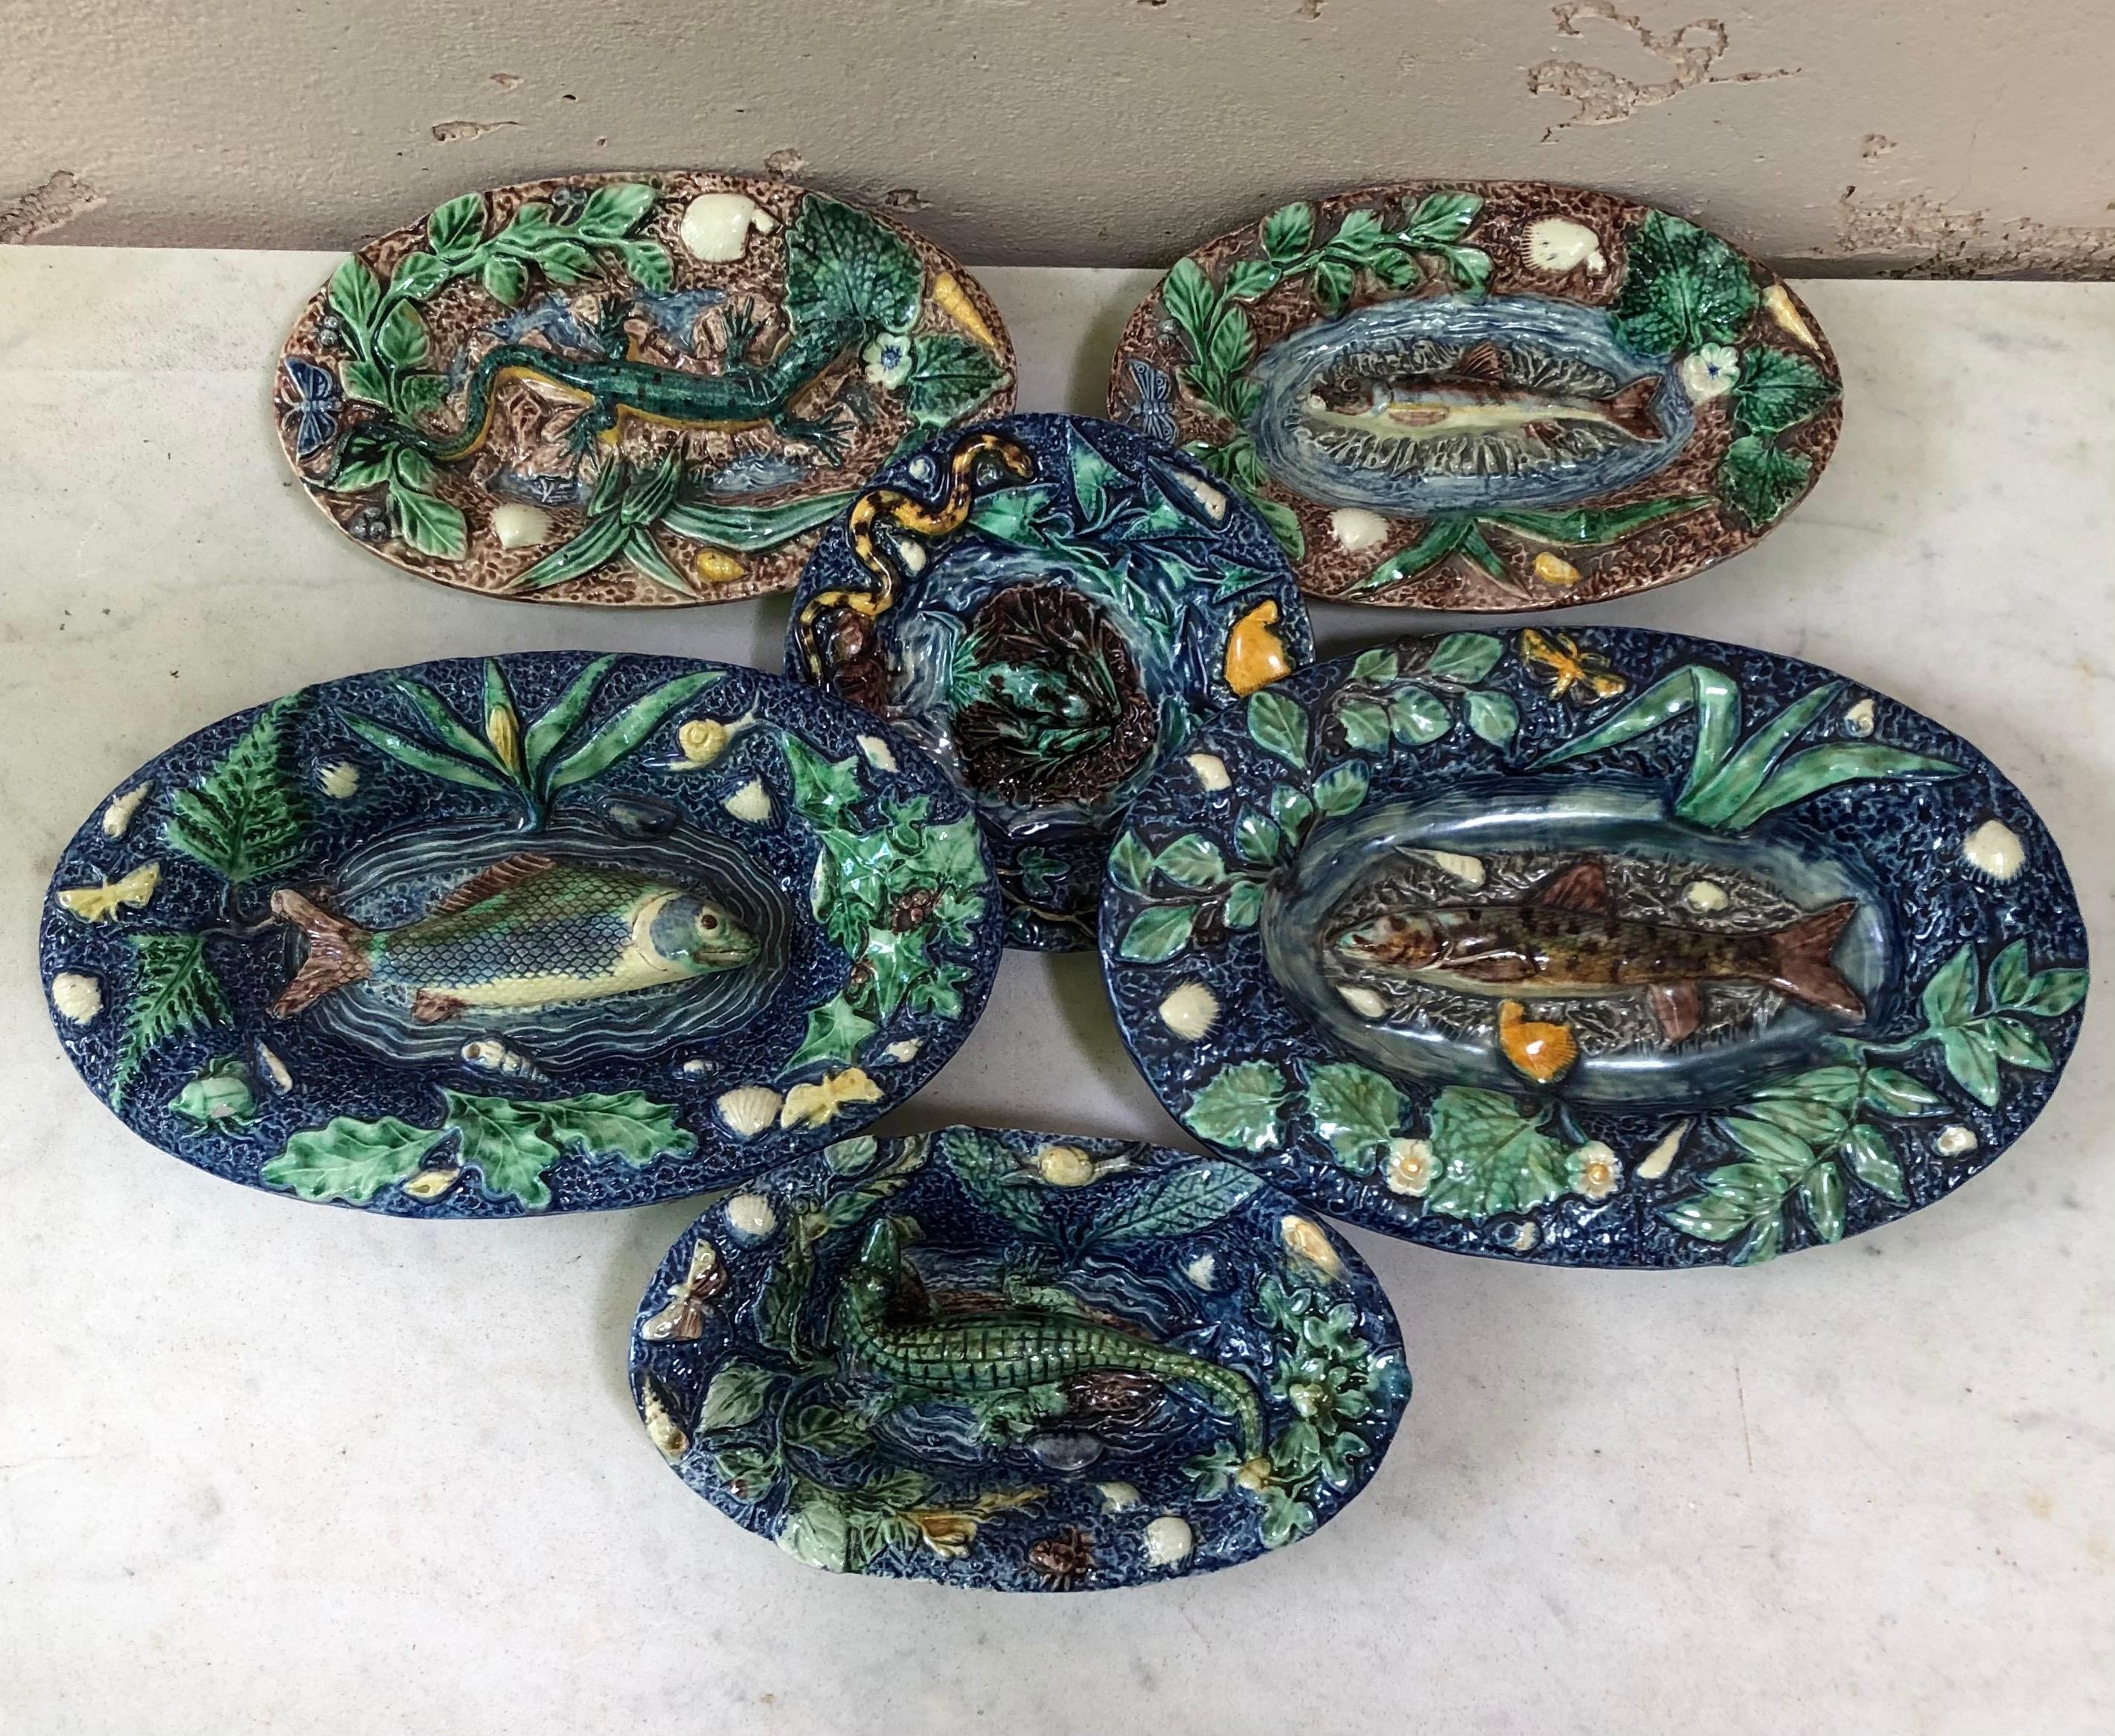 19th Century Majolica Palissy Portuguese Fishes & Eel Wall Platter Jose A. Cunha In Good Condition For Sale In Austin, TX